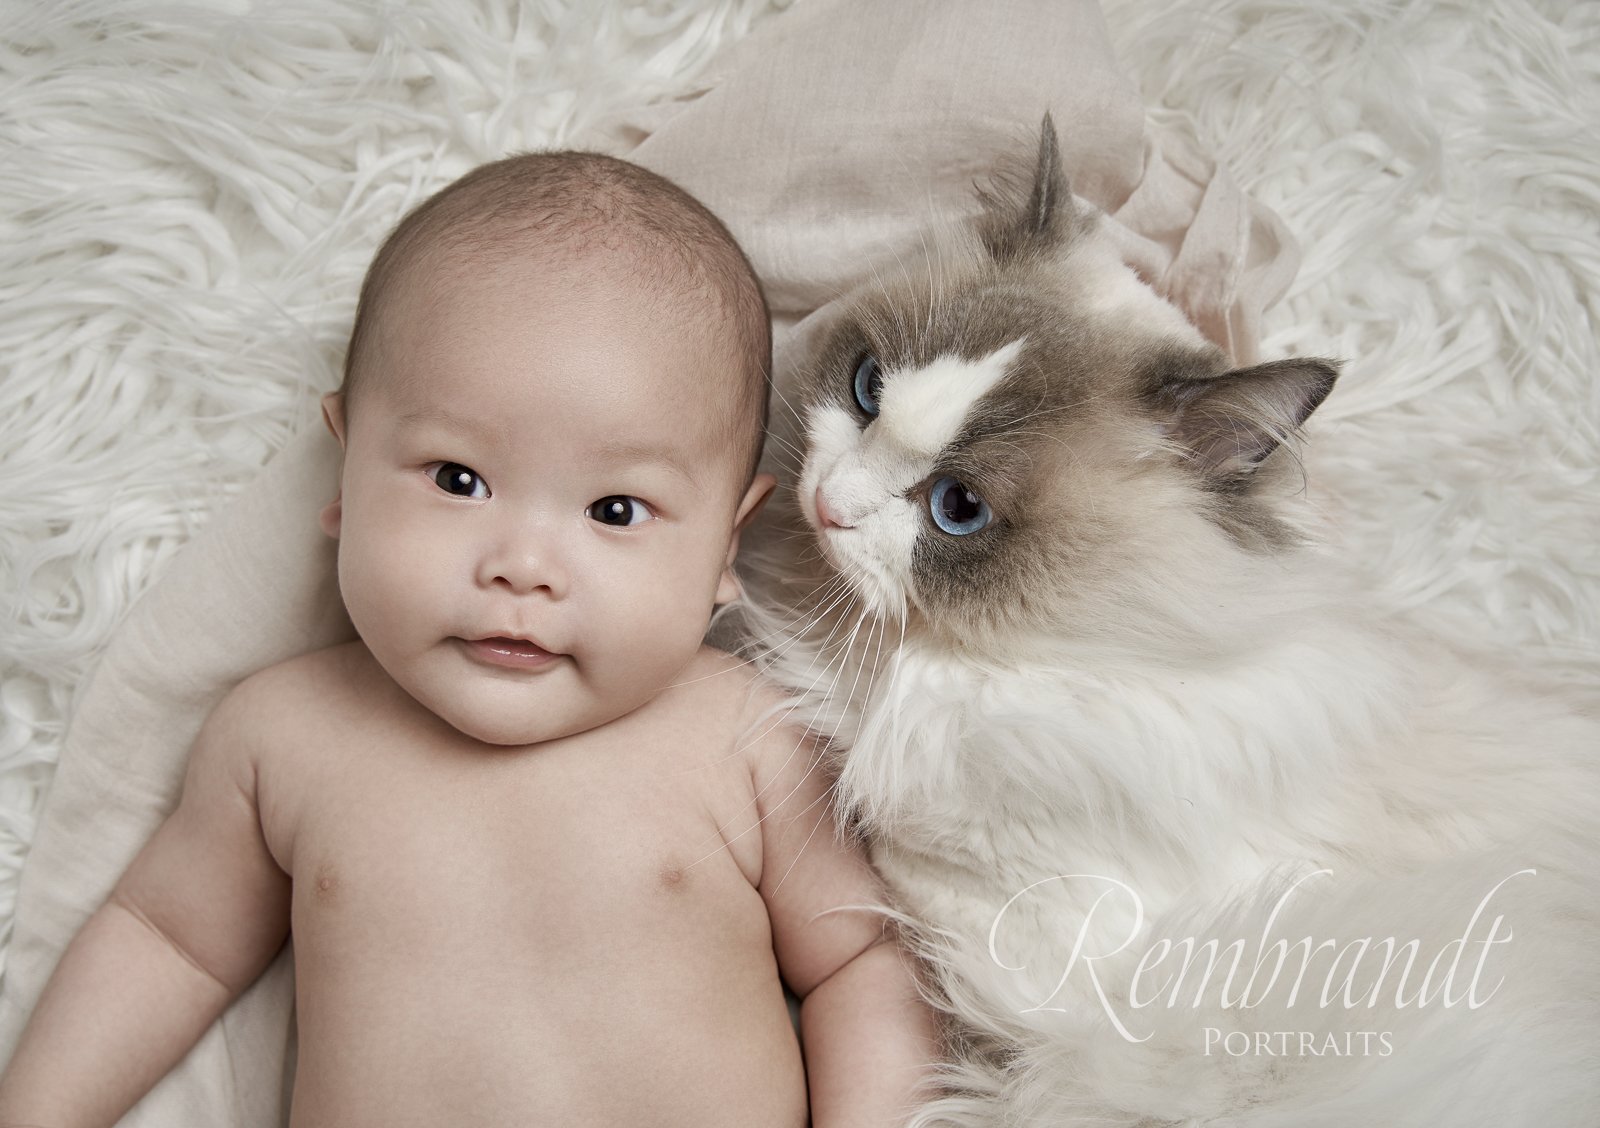 Rm974 chen 3-month baby with cat0348+.jpg